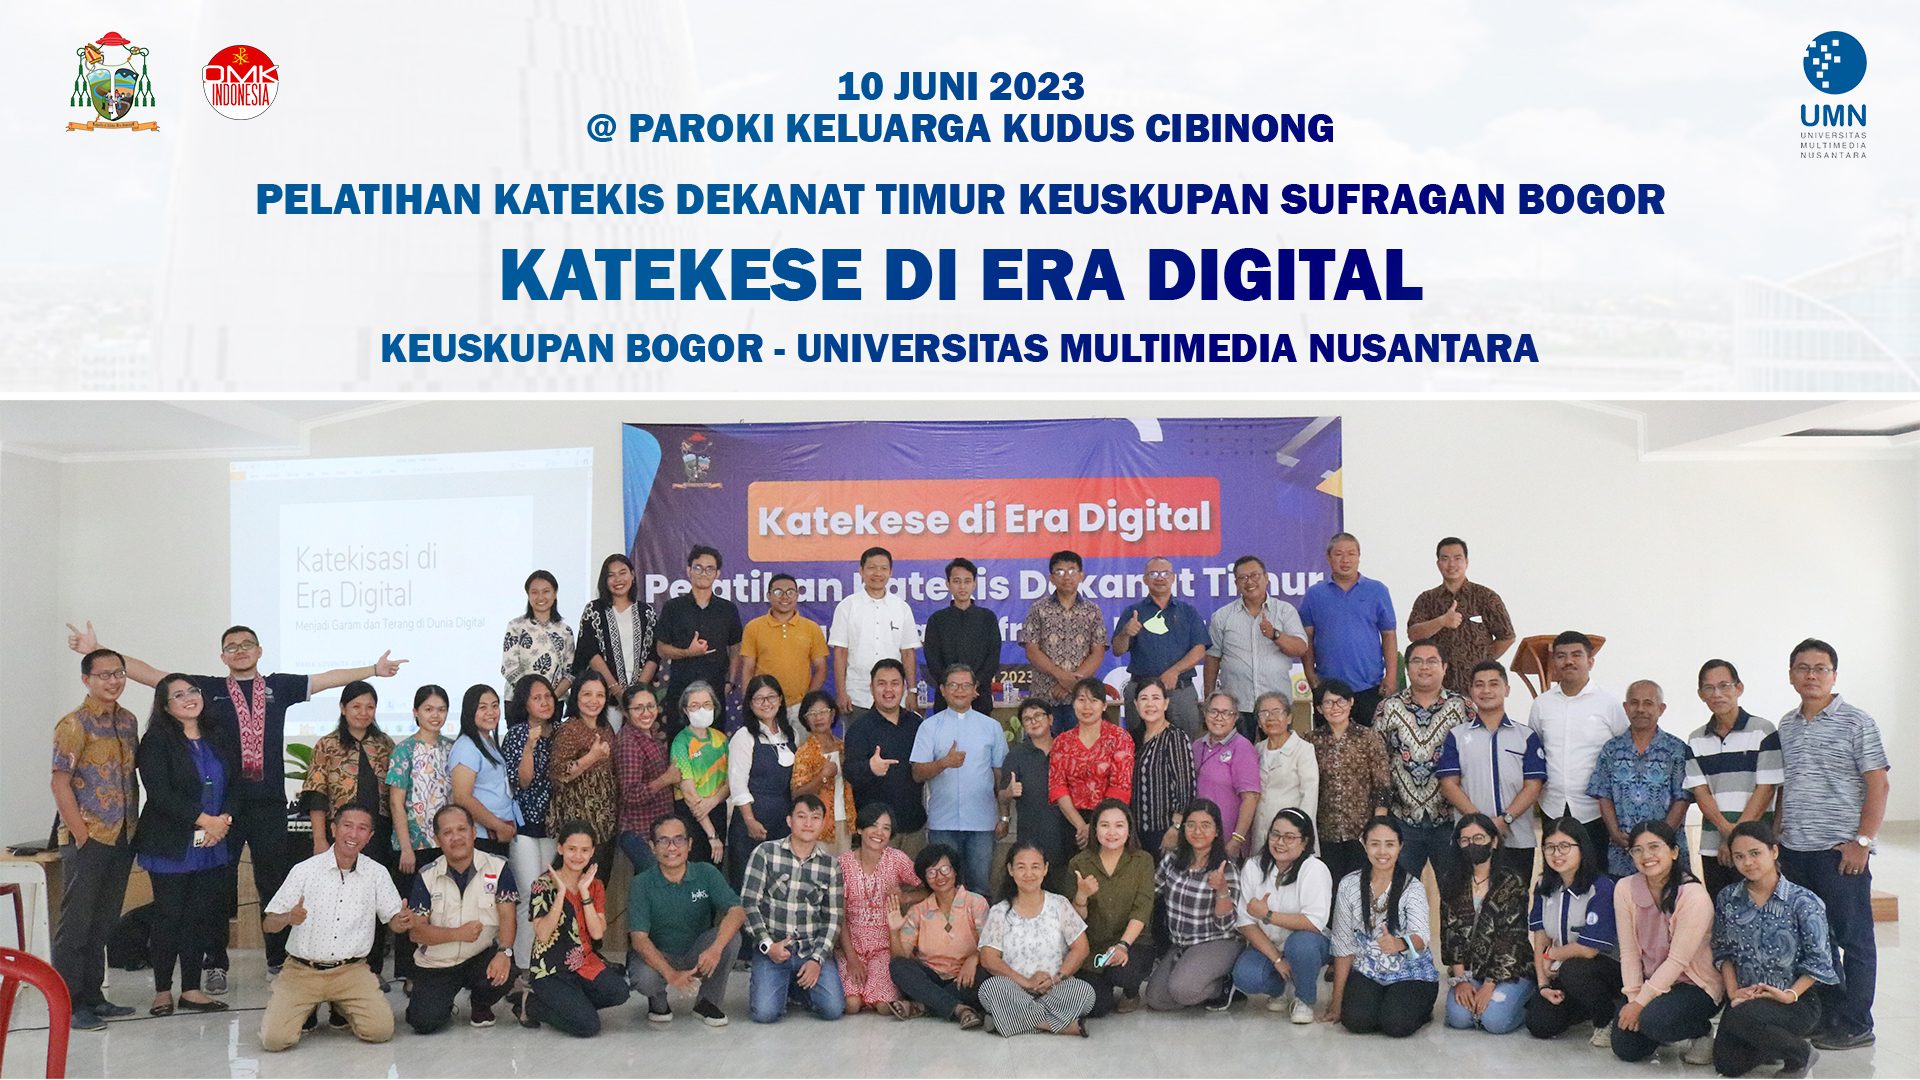 50 Catechists of the Eastern Deanery of Bogor Diocese Learn Digital Blessing Skills with UMN Communication Lecturer Team